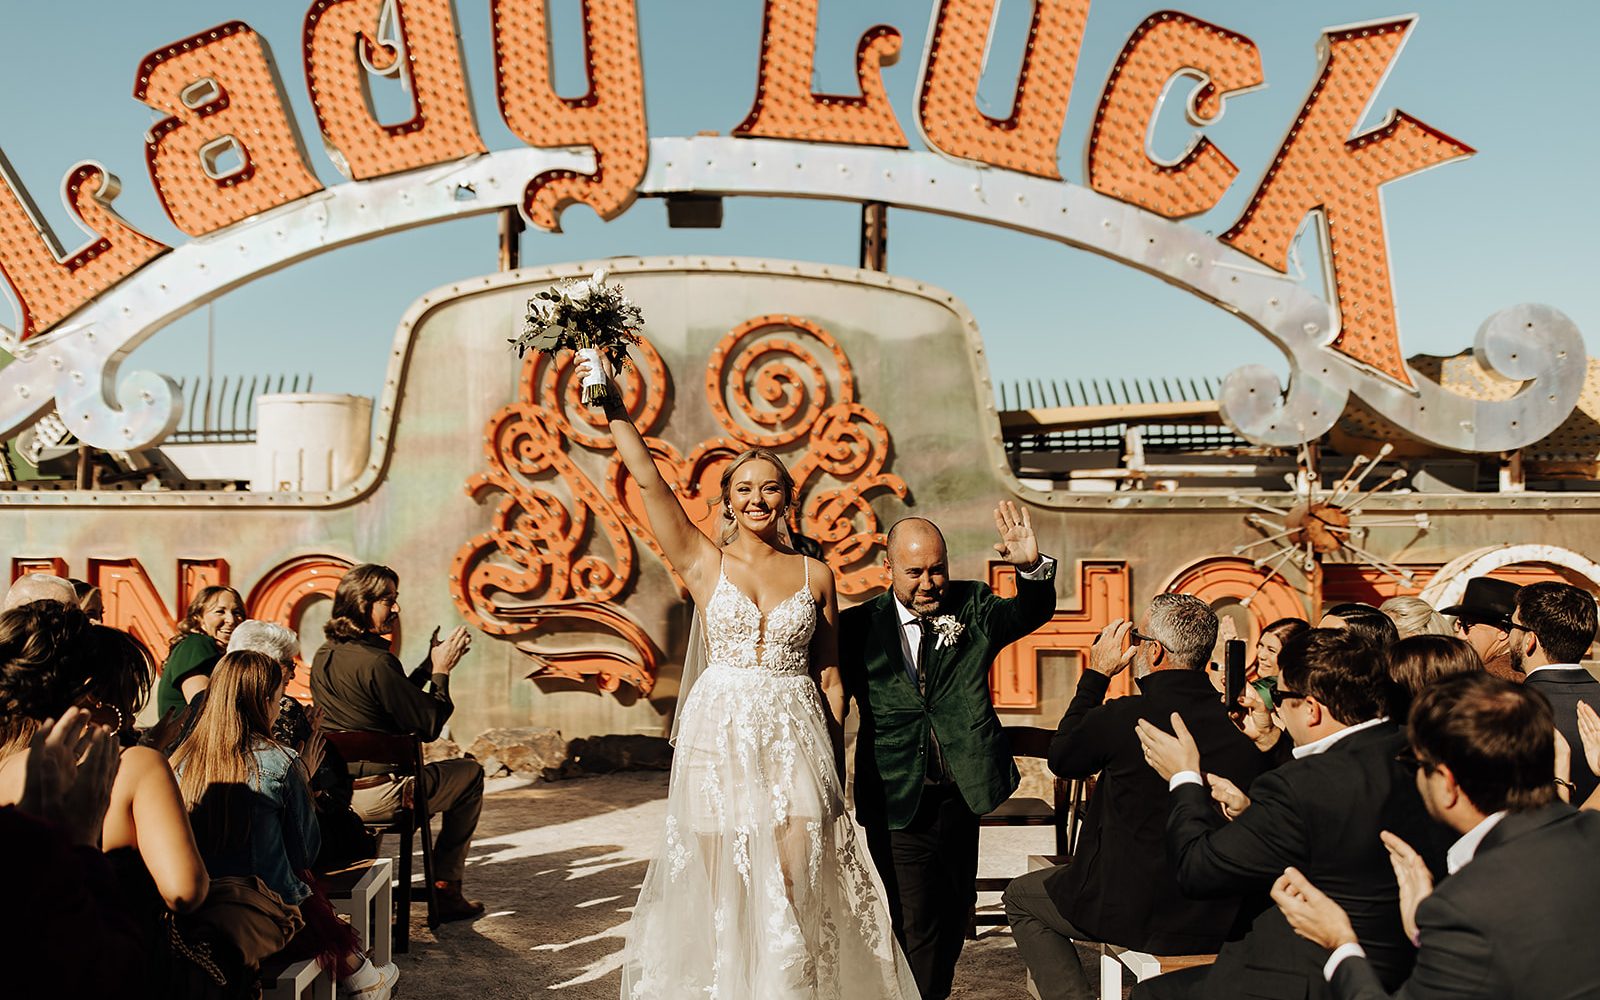 A couple getting married at The Neon Museum's North Gallery.